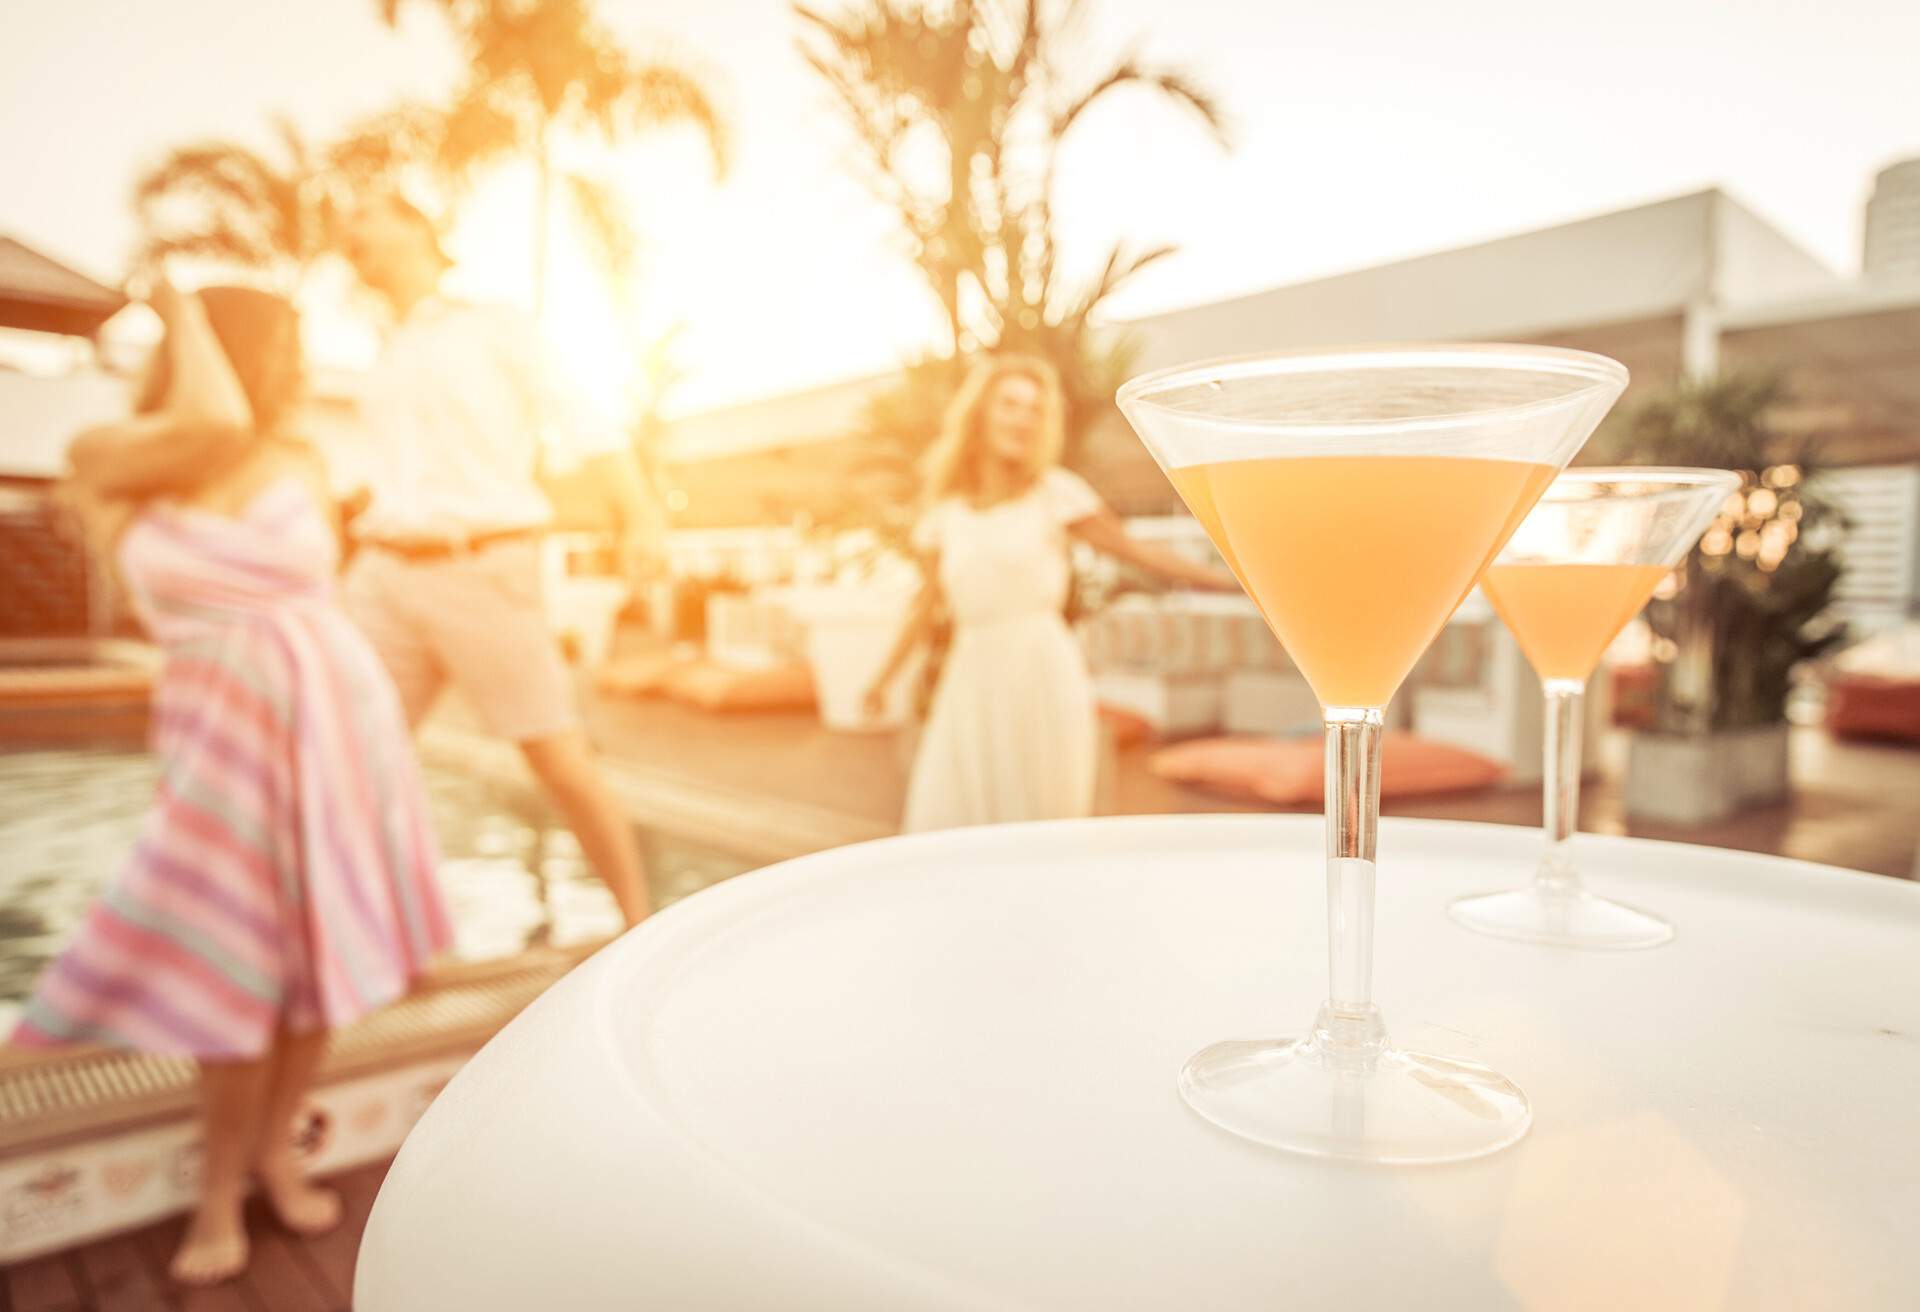 Two yellow cocktail drinks on a white circular table with a background of dancing people.